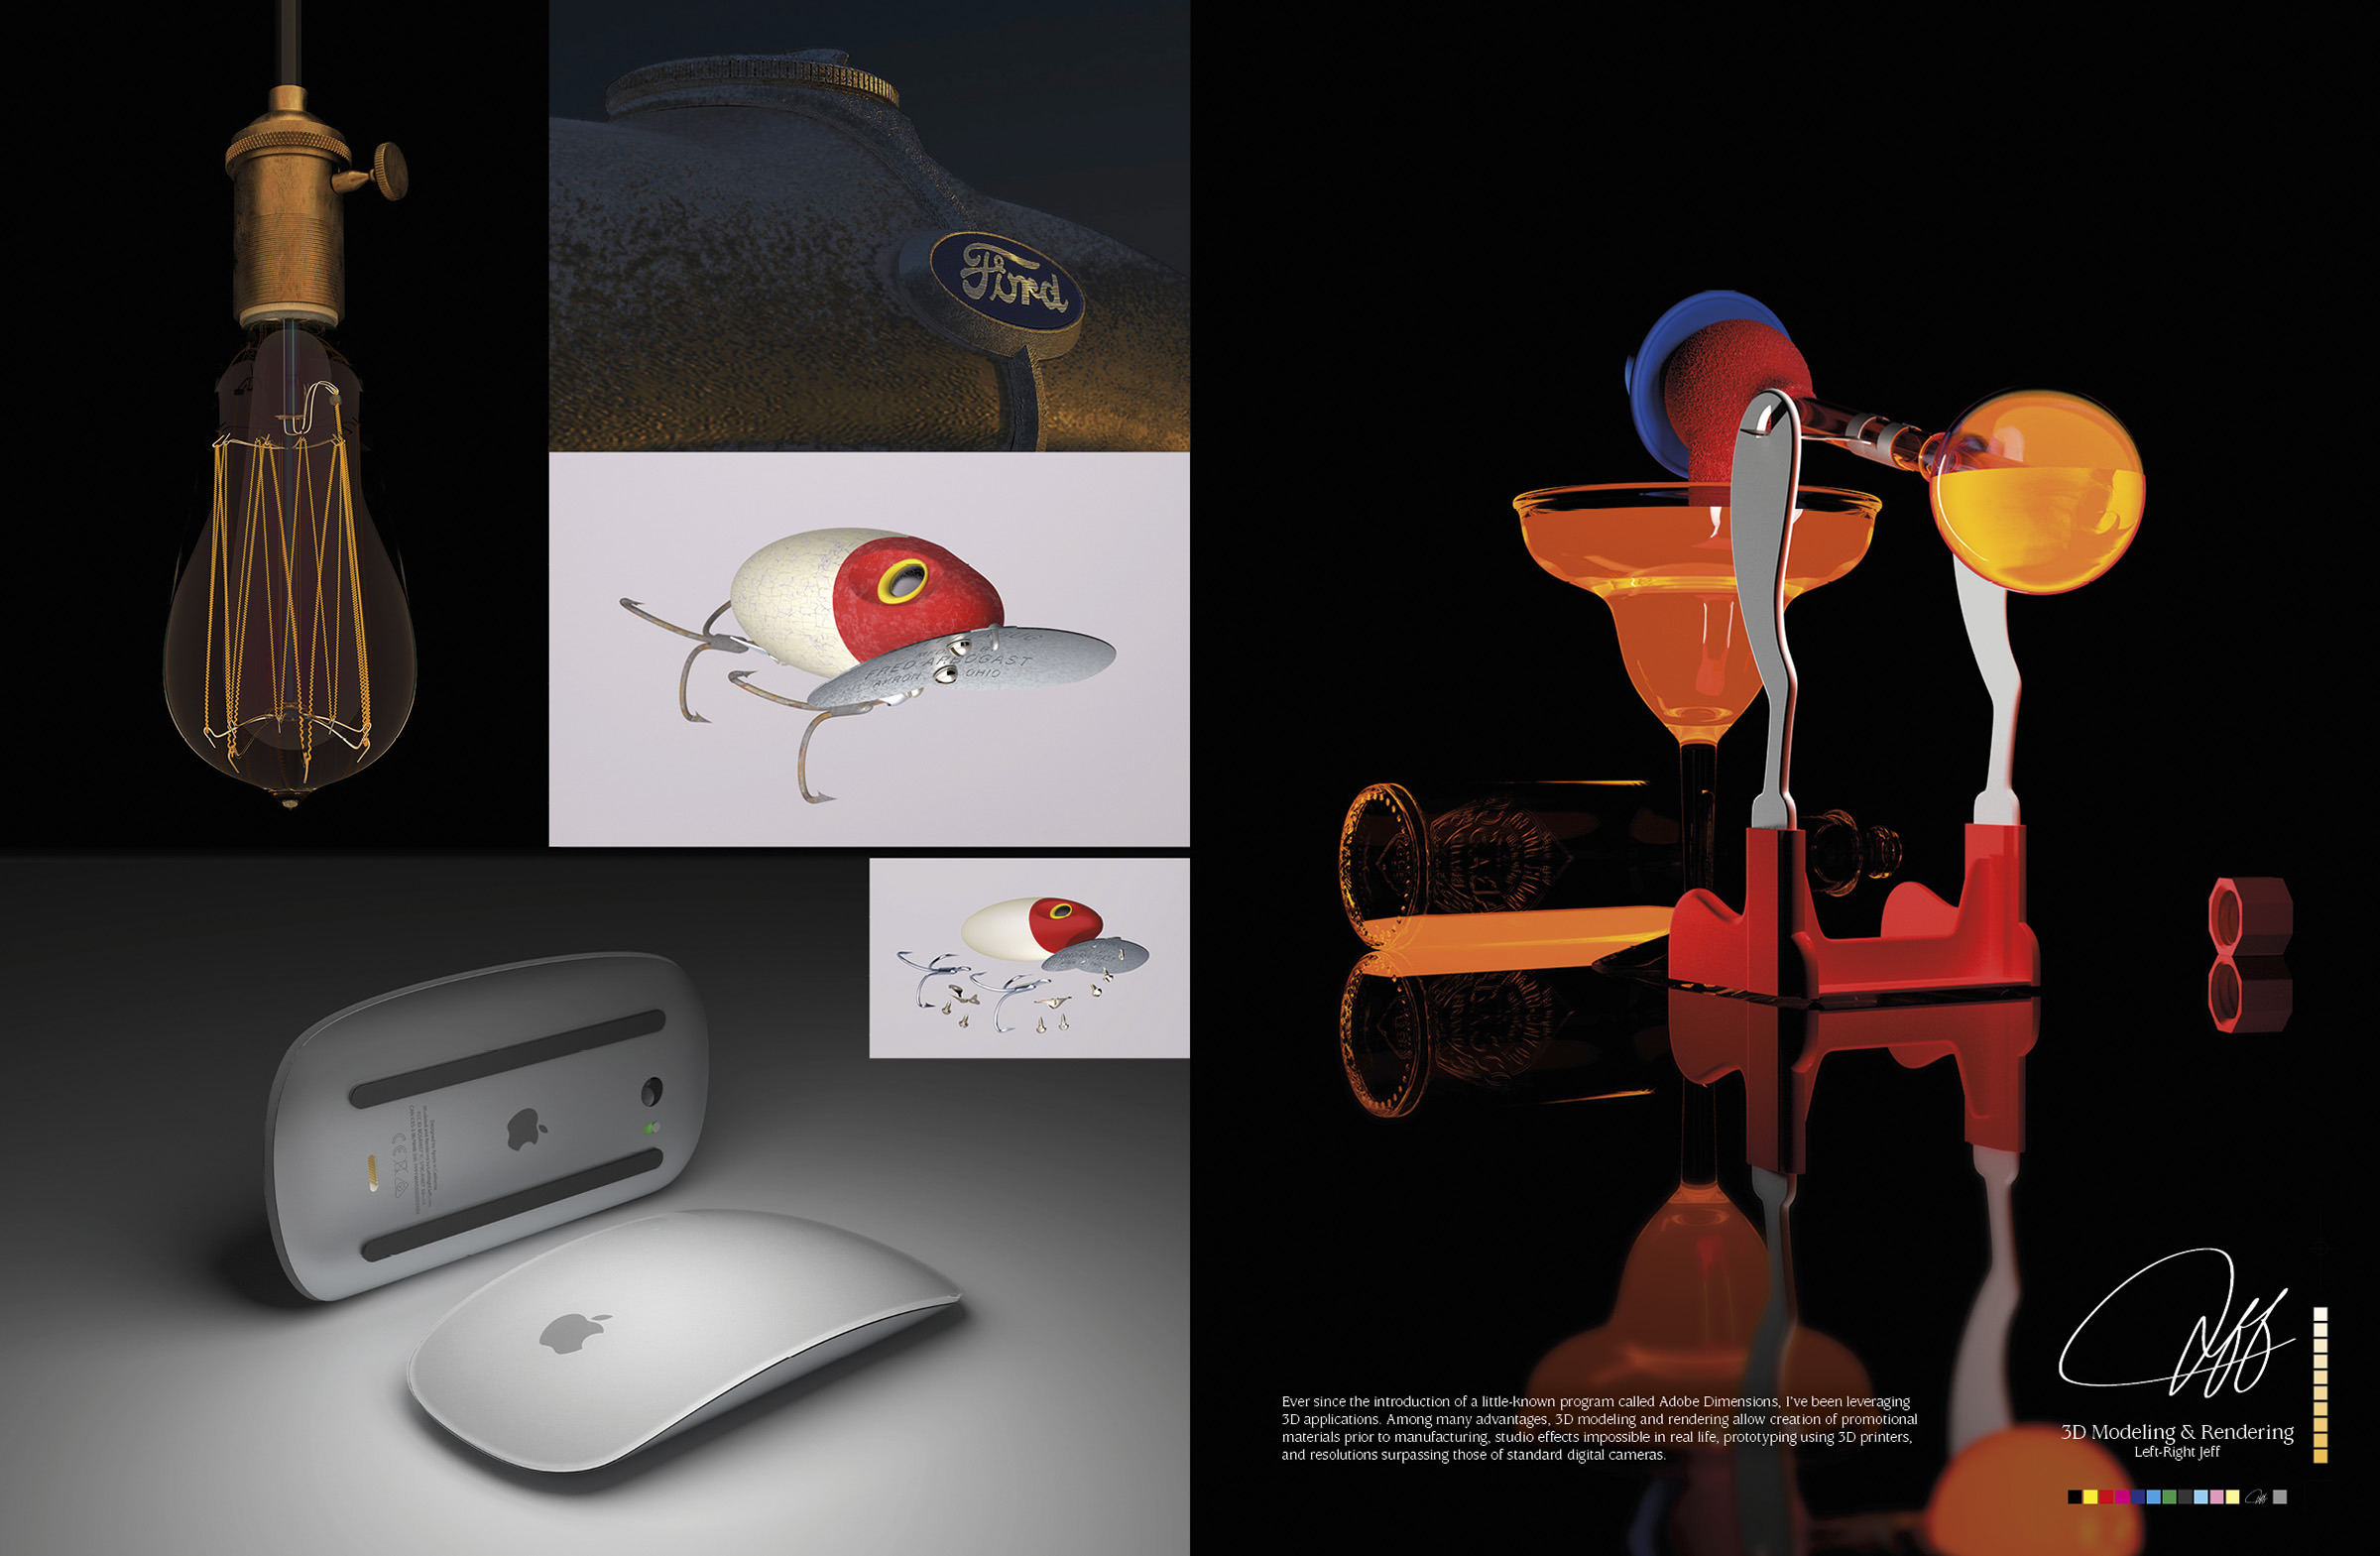 This is the 3D Modeling & Rendering spread from Jeff Nelson’s portfolio.